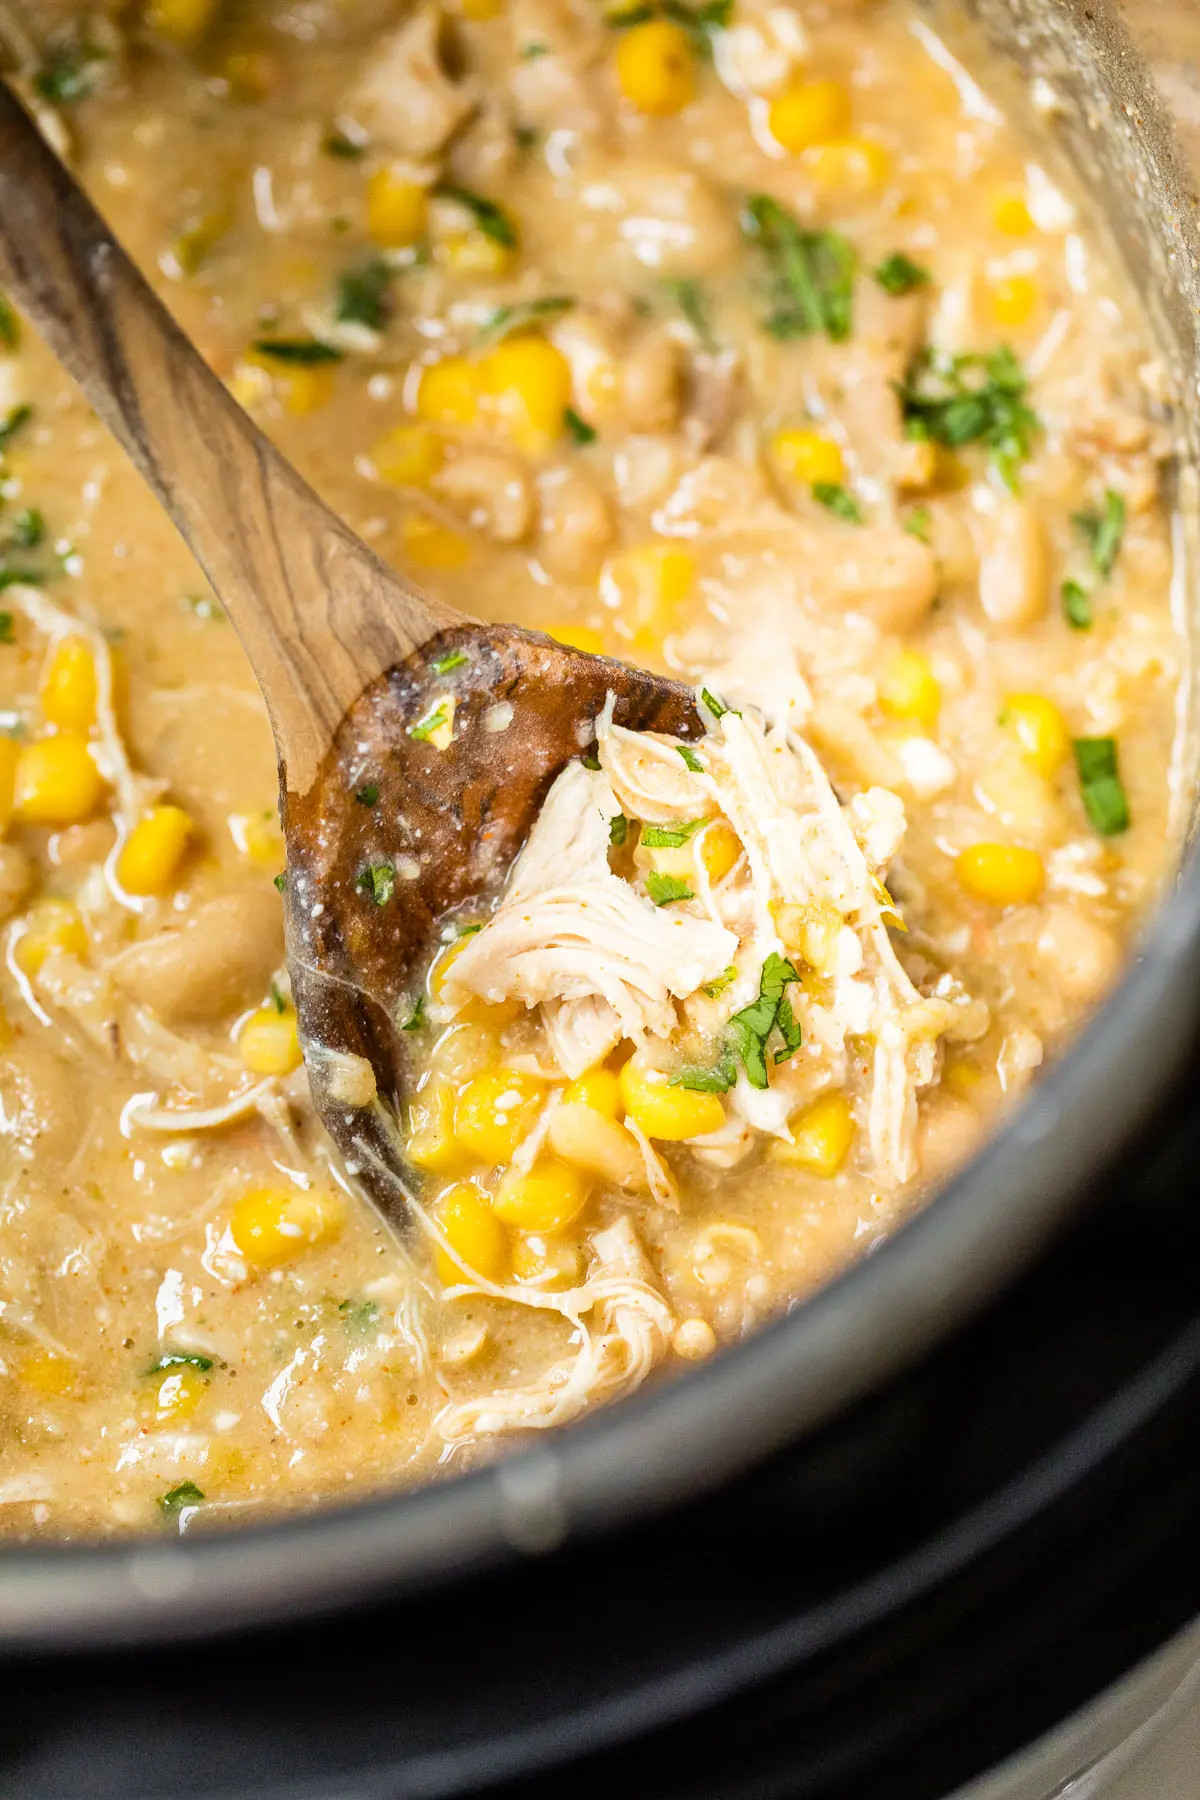 cooked shredded chicken, corn and broth in a pressure cooker